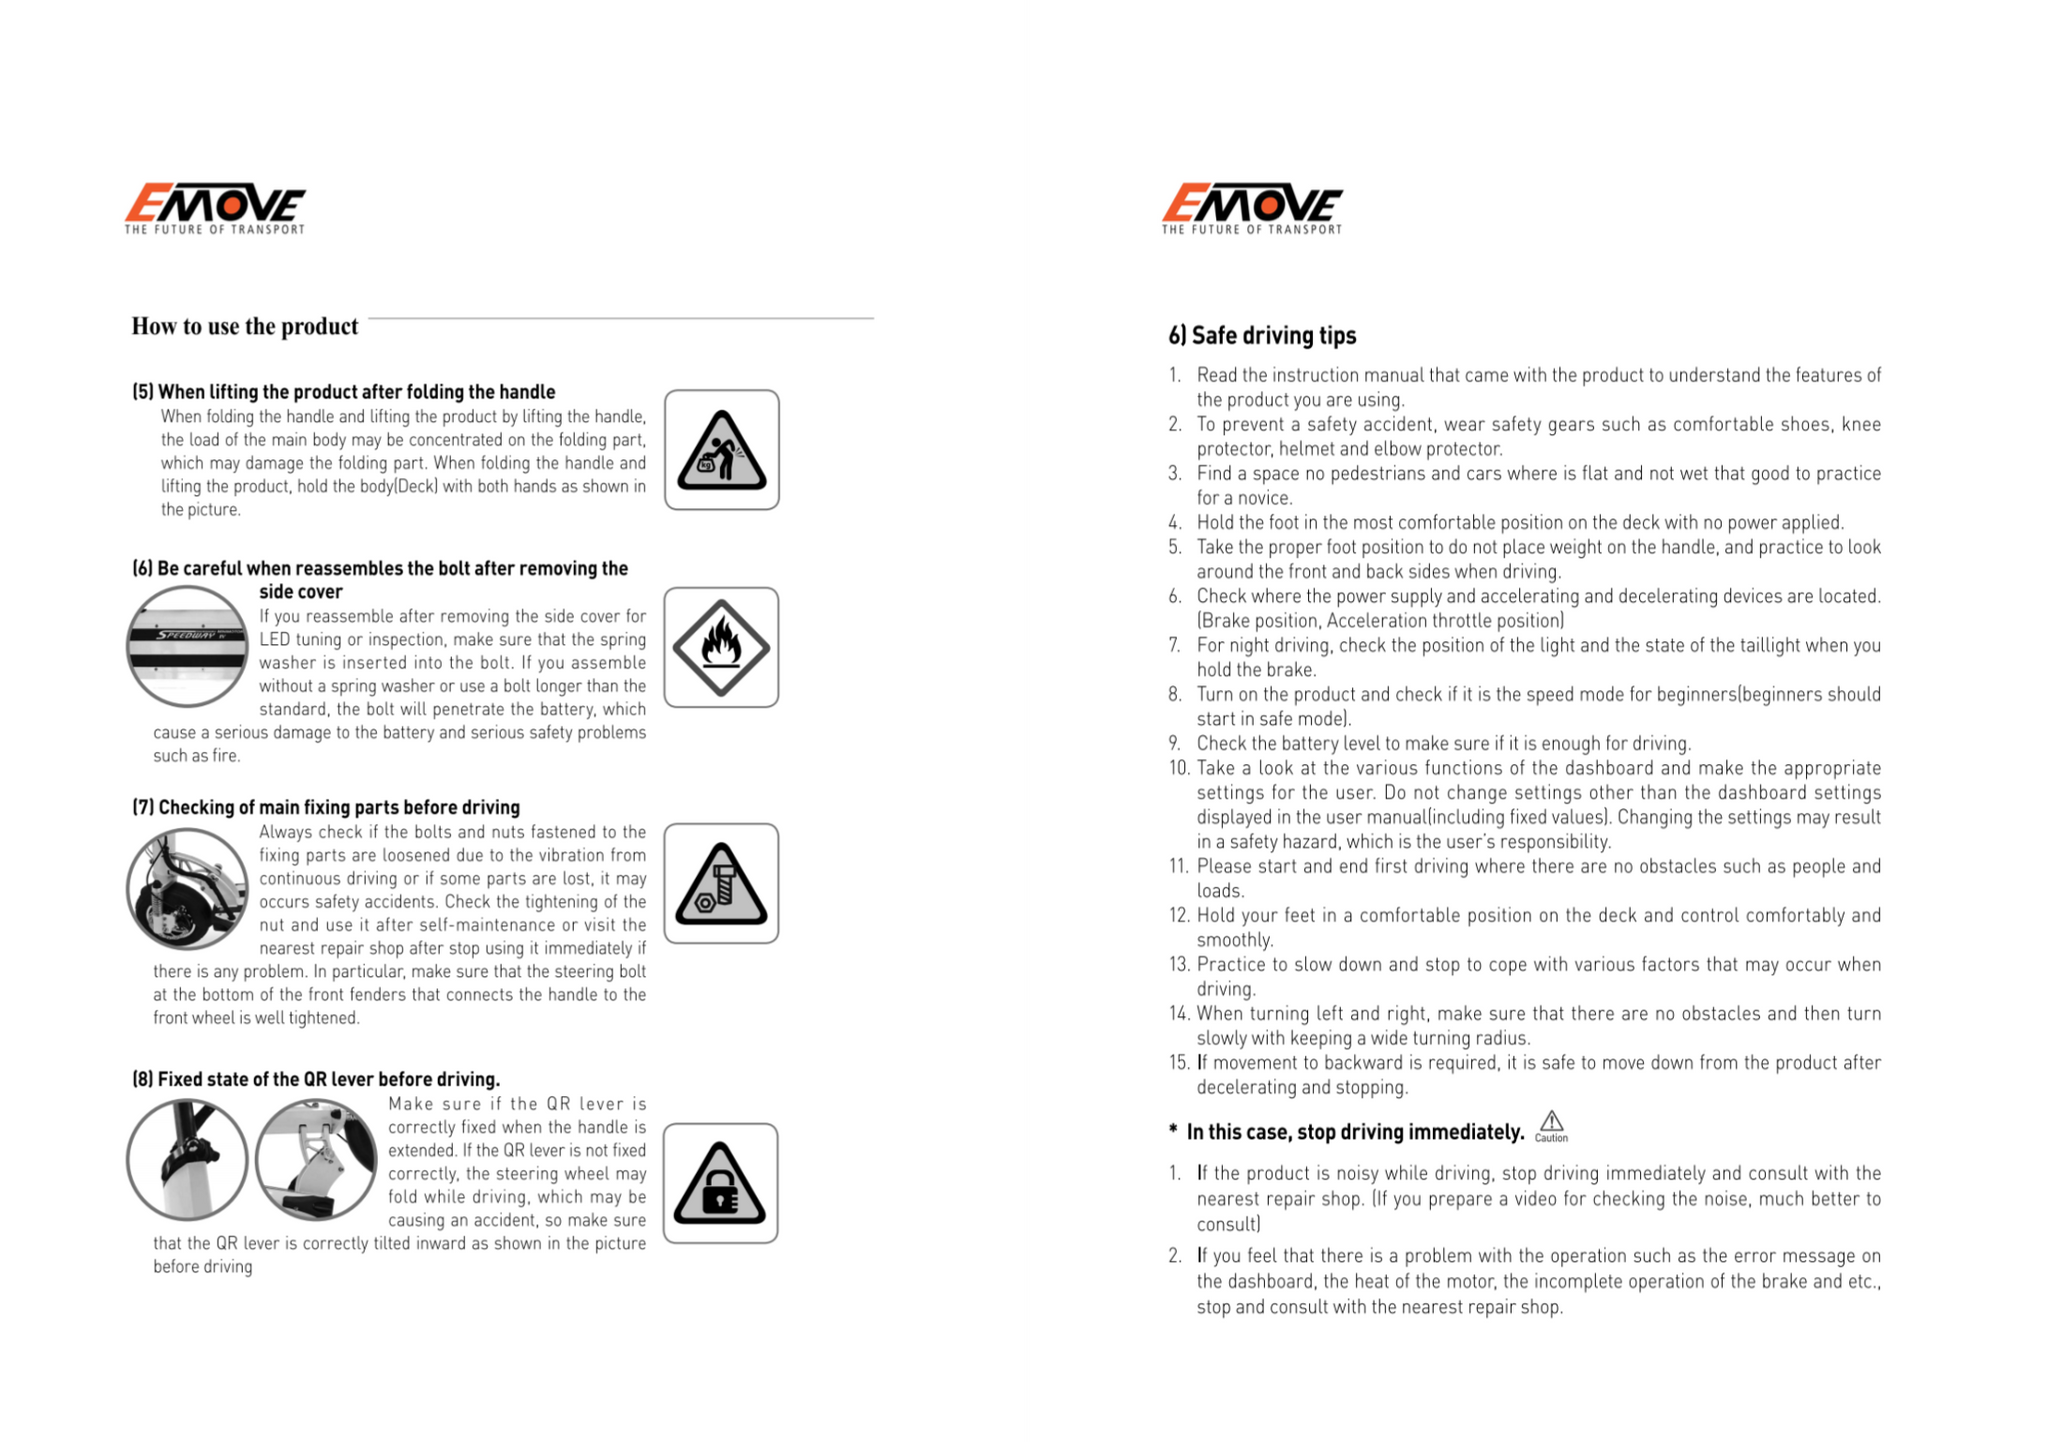 revidere Outlook USA USER MANUAL for EMOVE Cruiser Electric Scooter - VORO MOTORS